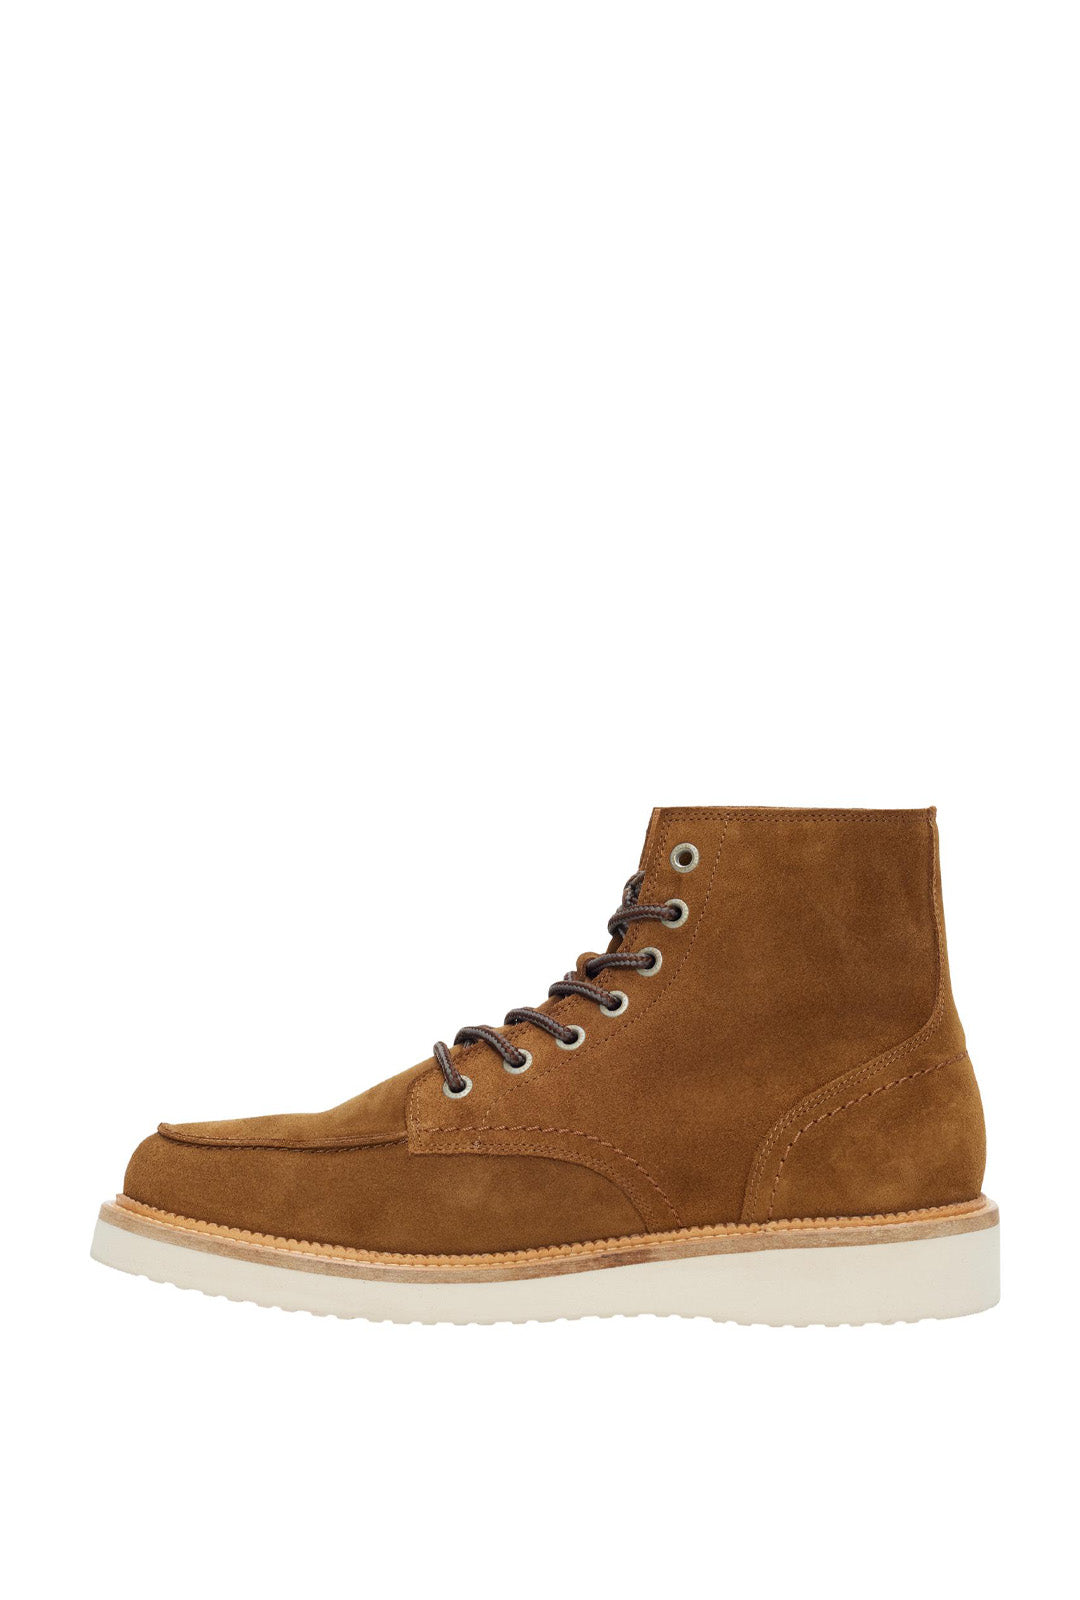  SLHTEO NEW SUEDE MOC-TOE BOOT B